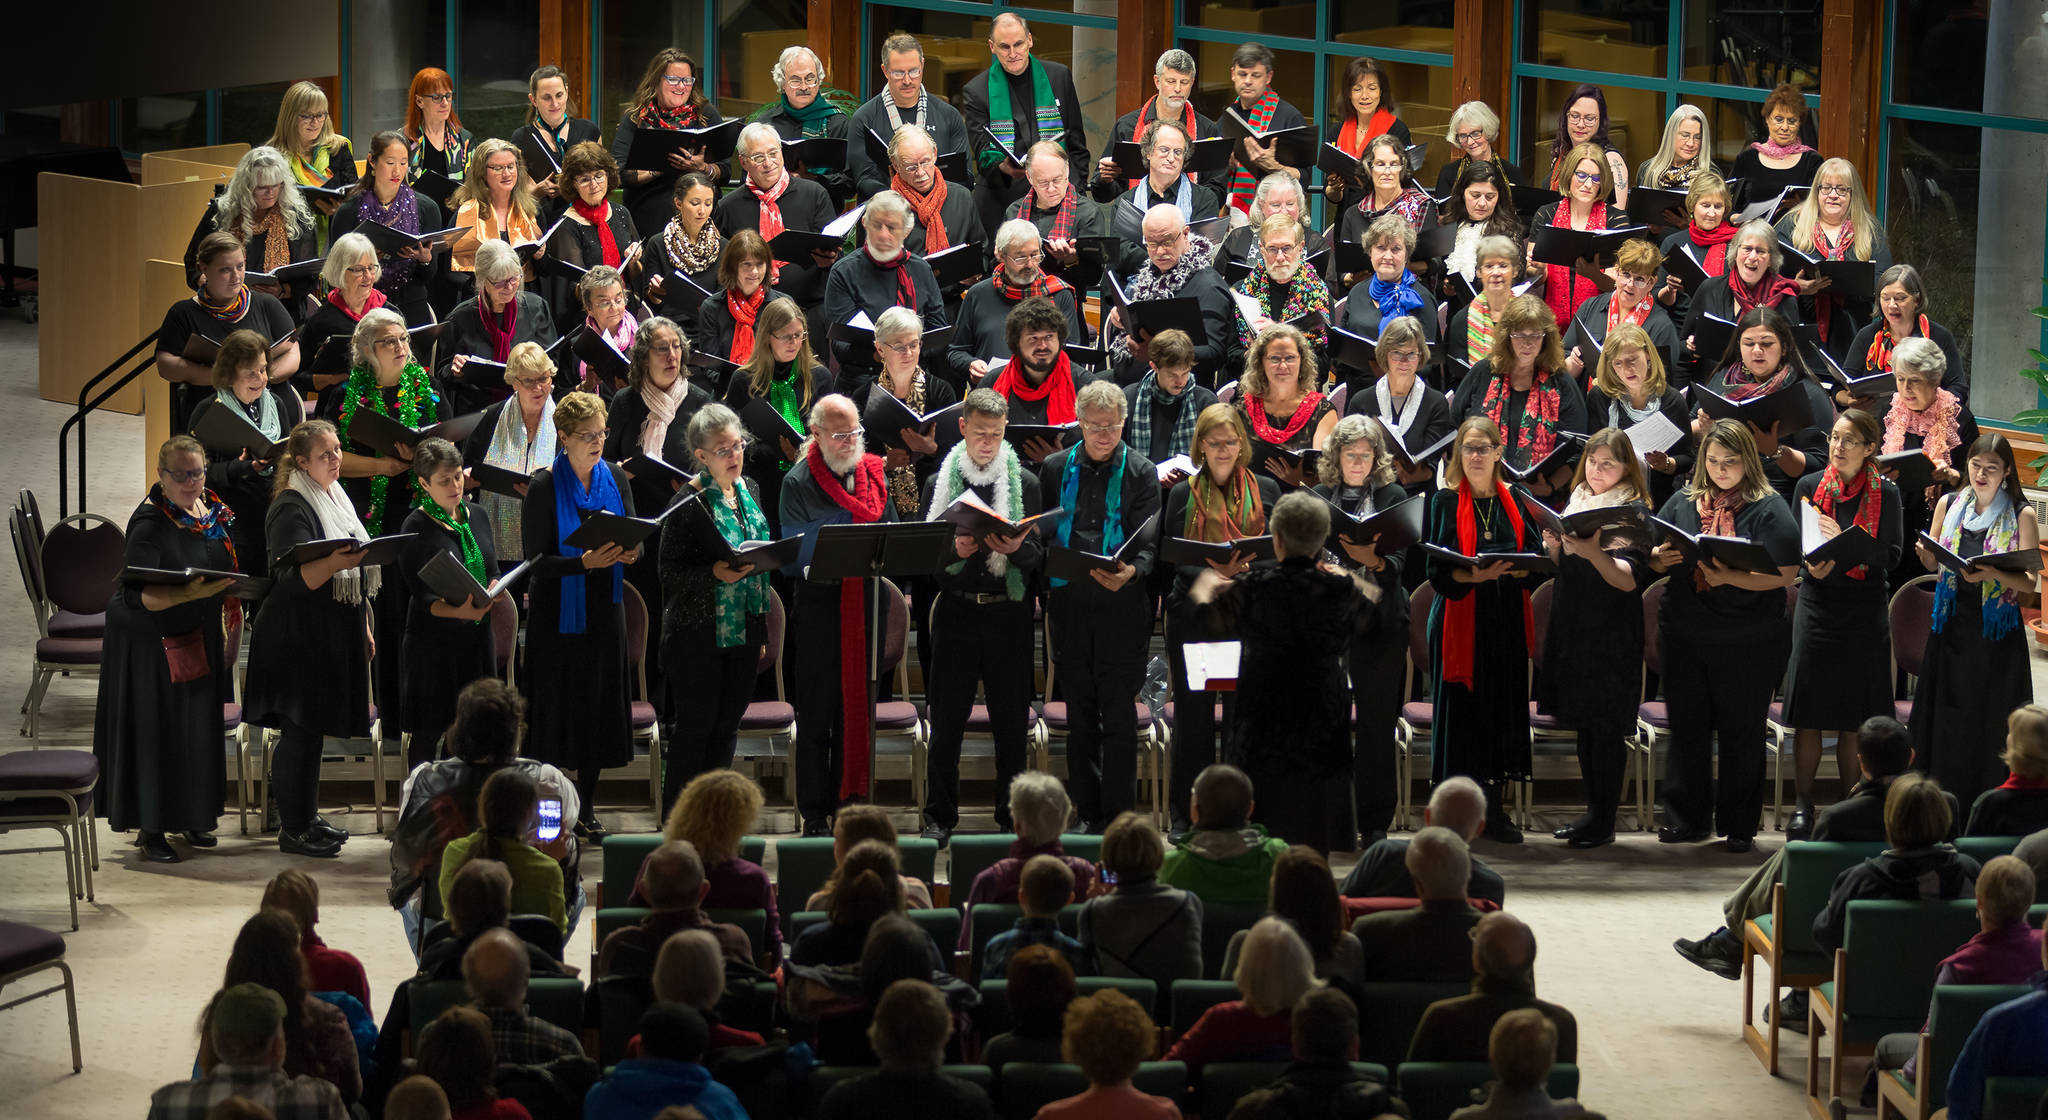 Singers perform during the 2017 Holiday Pops Concert in December 2017. (Courtesy Photo | Juneau Arts & Humanities Council)